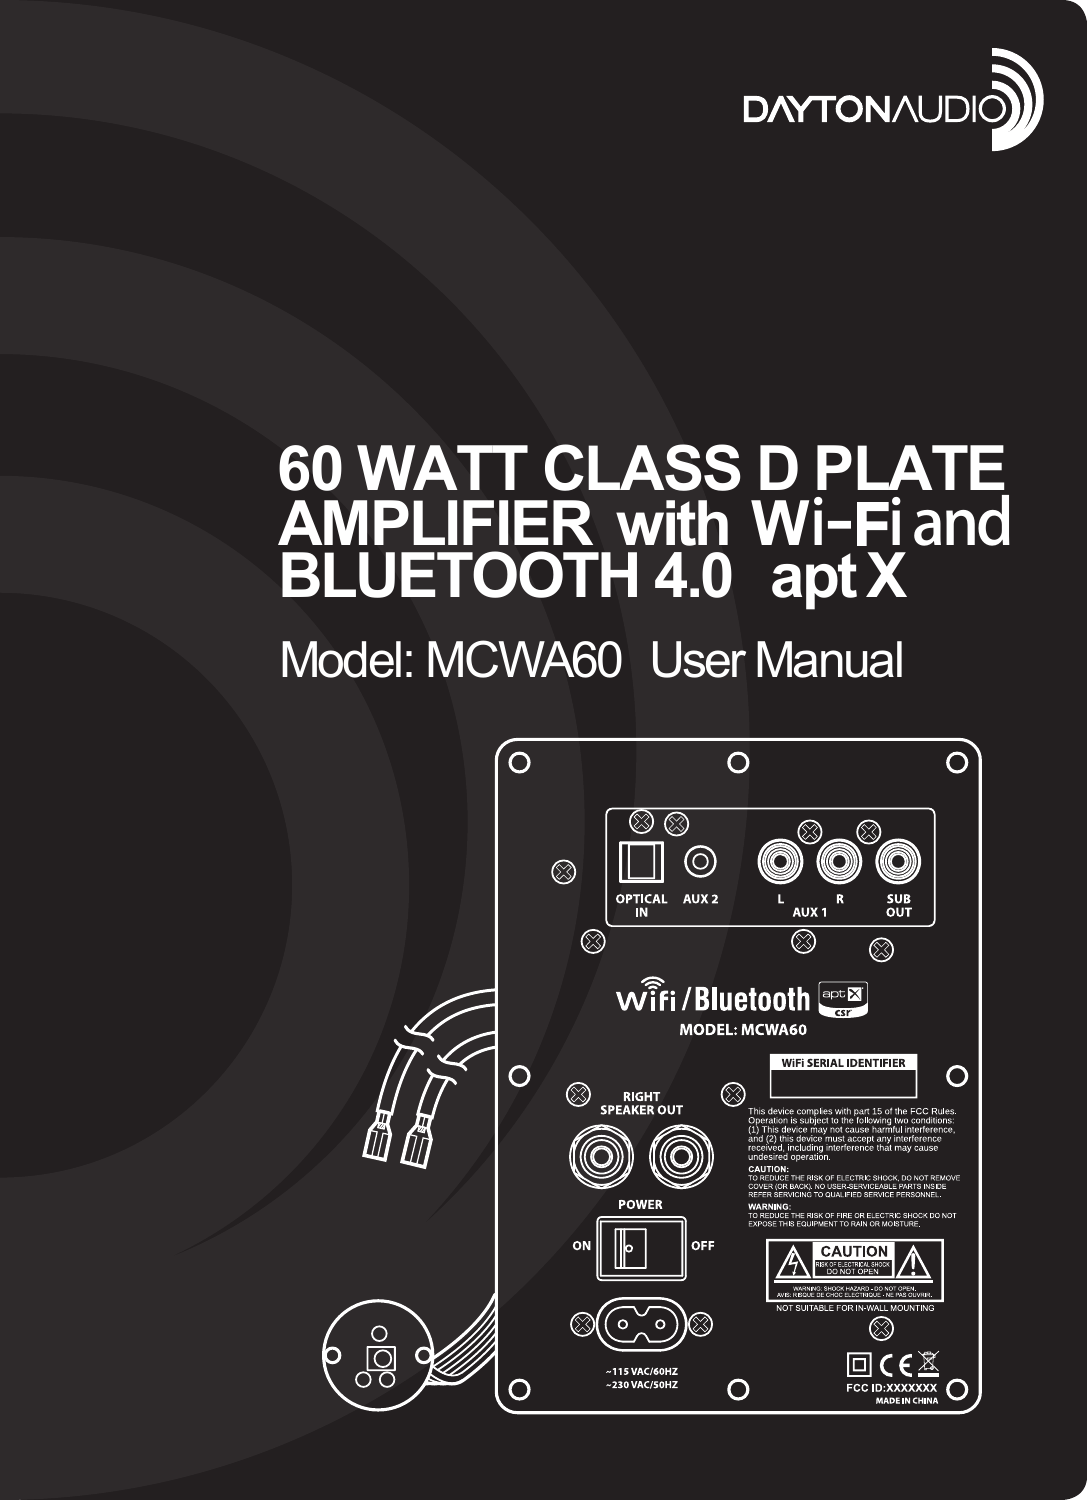 60 WATT CLASS D PLATE AMPLIFIER  with Wii and  BLUETOOTH 4.0  apt XModel: MCWA60  User Manual